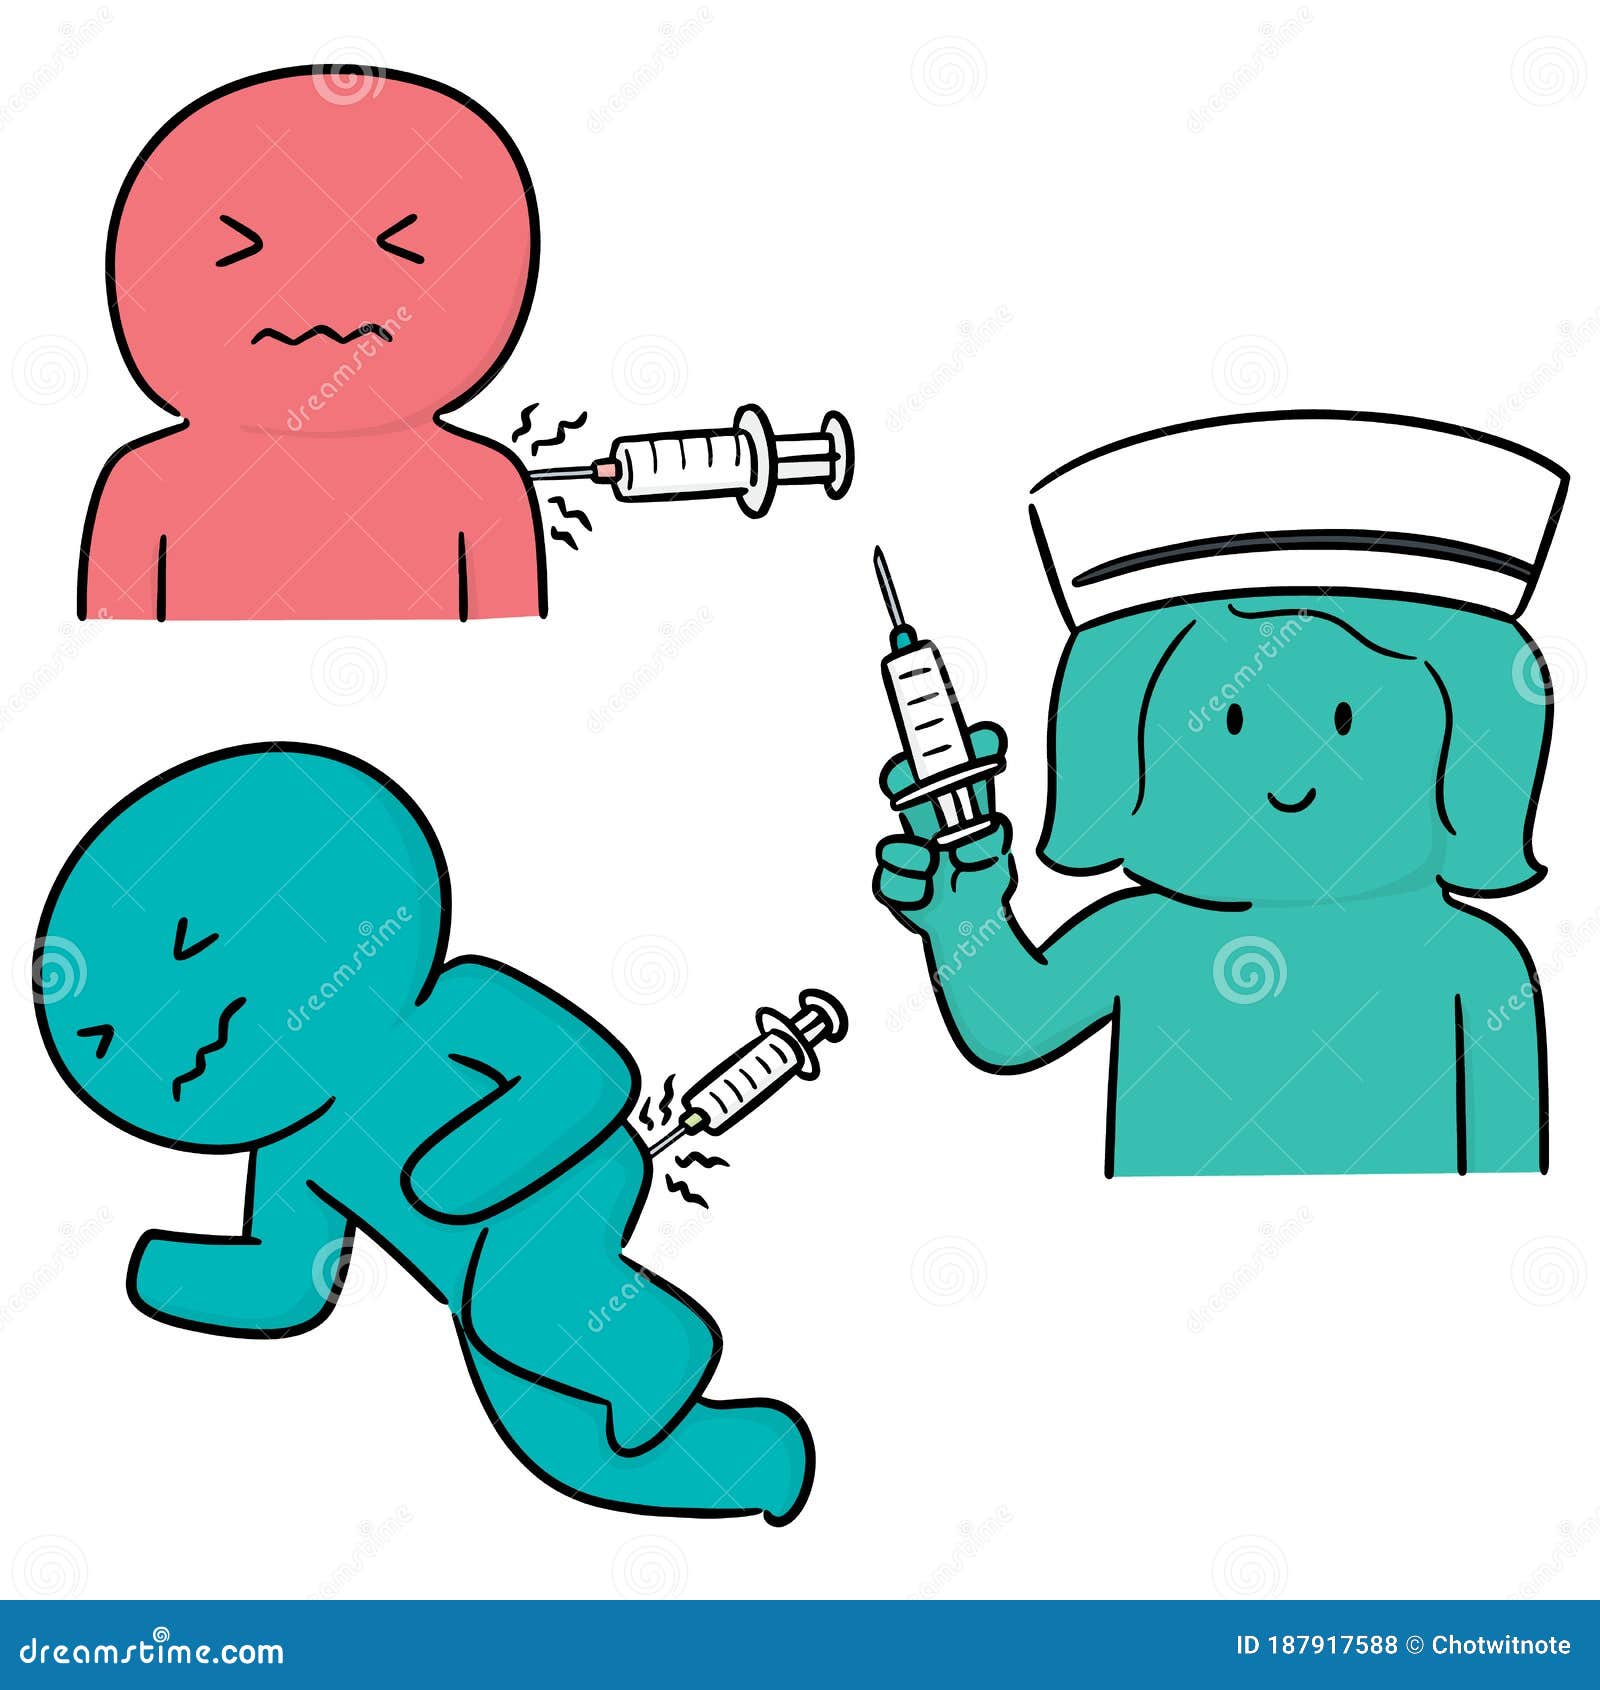 Sterile Water Injection Stock Illustrations – 61 Sterile Water Injection  Stock Illustrations, Vectors & Clipart - Dreamstime